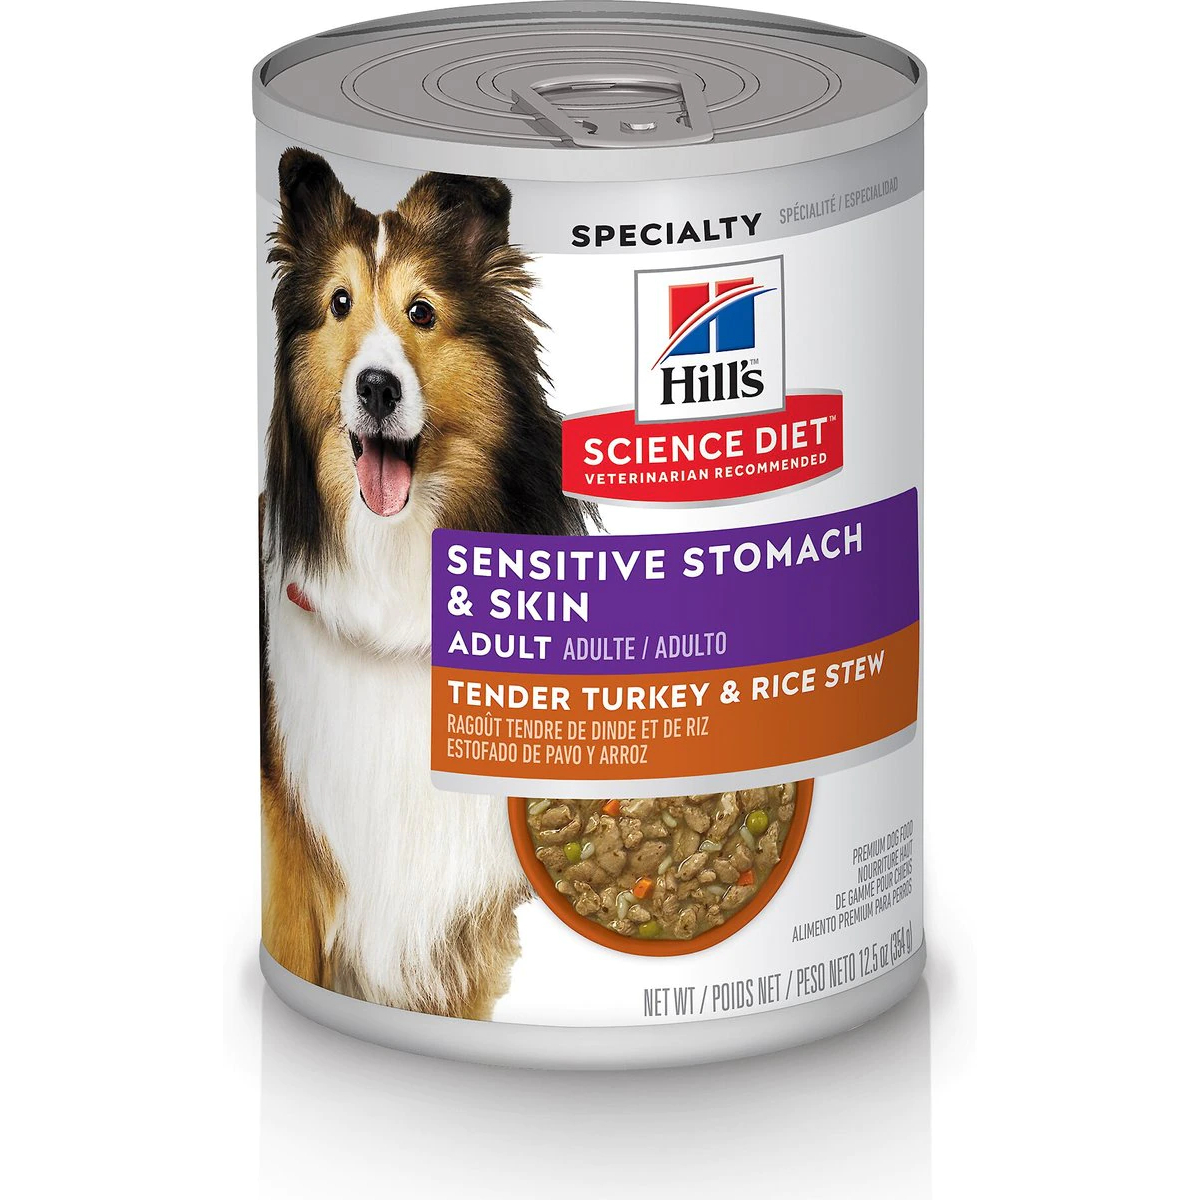 Hill's Science Diet Adult Sensitive Stomach & Skin Tender Turkey & Rice Stew Canned Dog Food